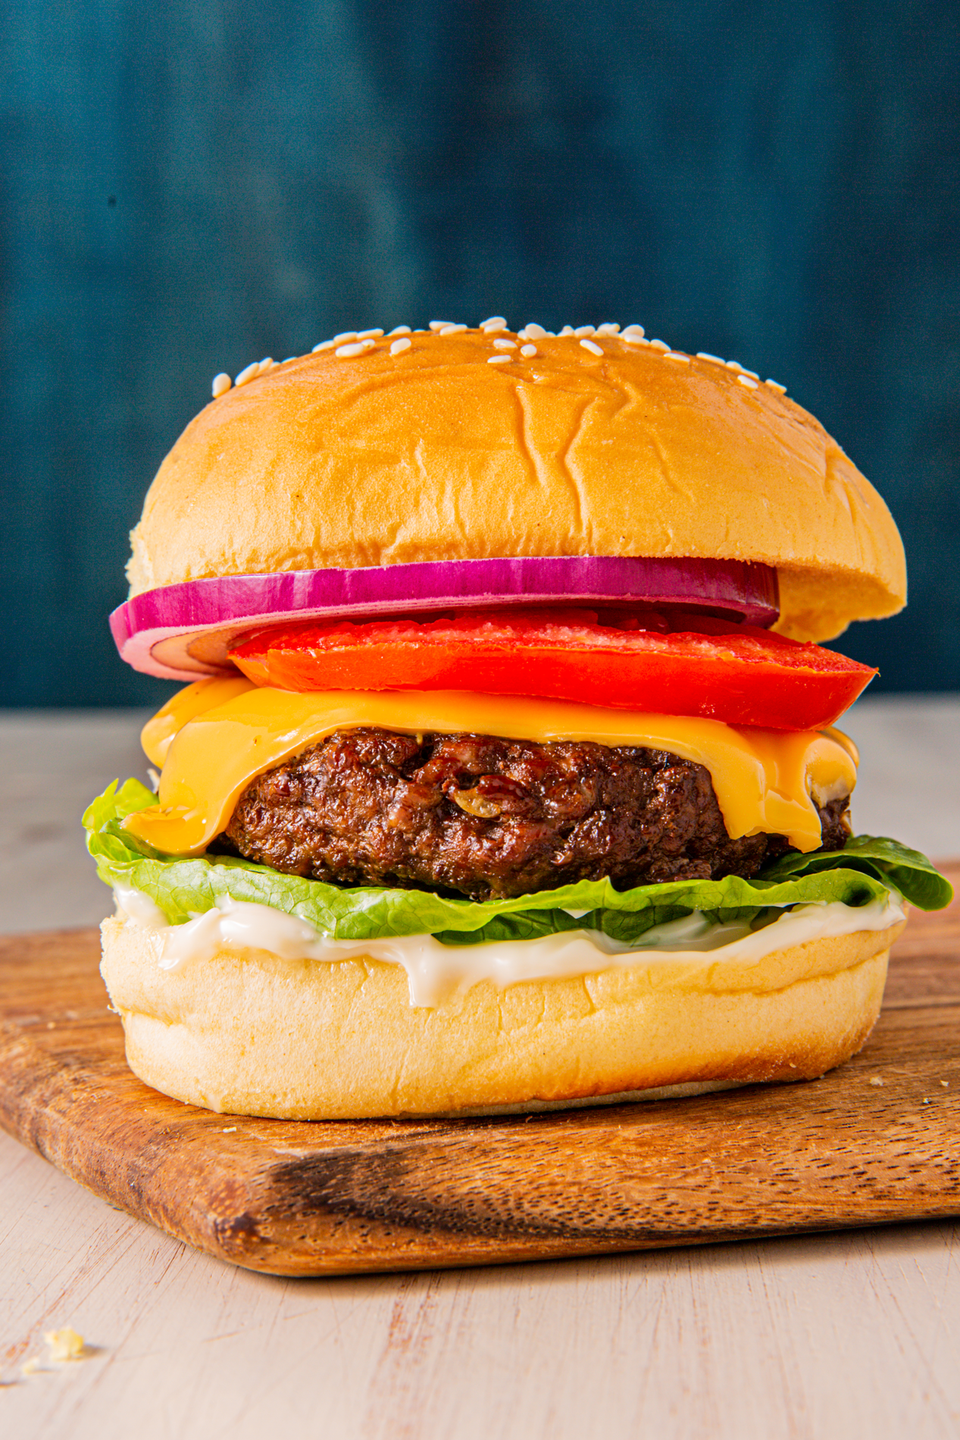 <p>One perfectlyjuicy air fryer cheeseburger and there's no going back. </p><p>Get the recipe from <a href="https://www.delish.com/cooking/recipe-ideas/a28509043/air-fryer-hamburgers-recipe/" rel="nofollow noopener" target="_blank" data-ylk="slk:Delish" class="link ">Delish</a>.</p>